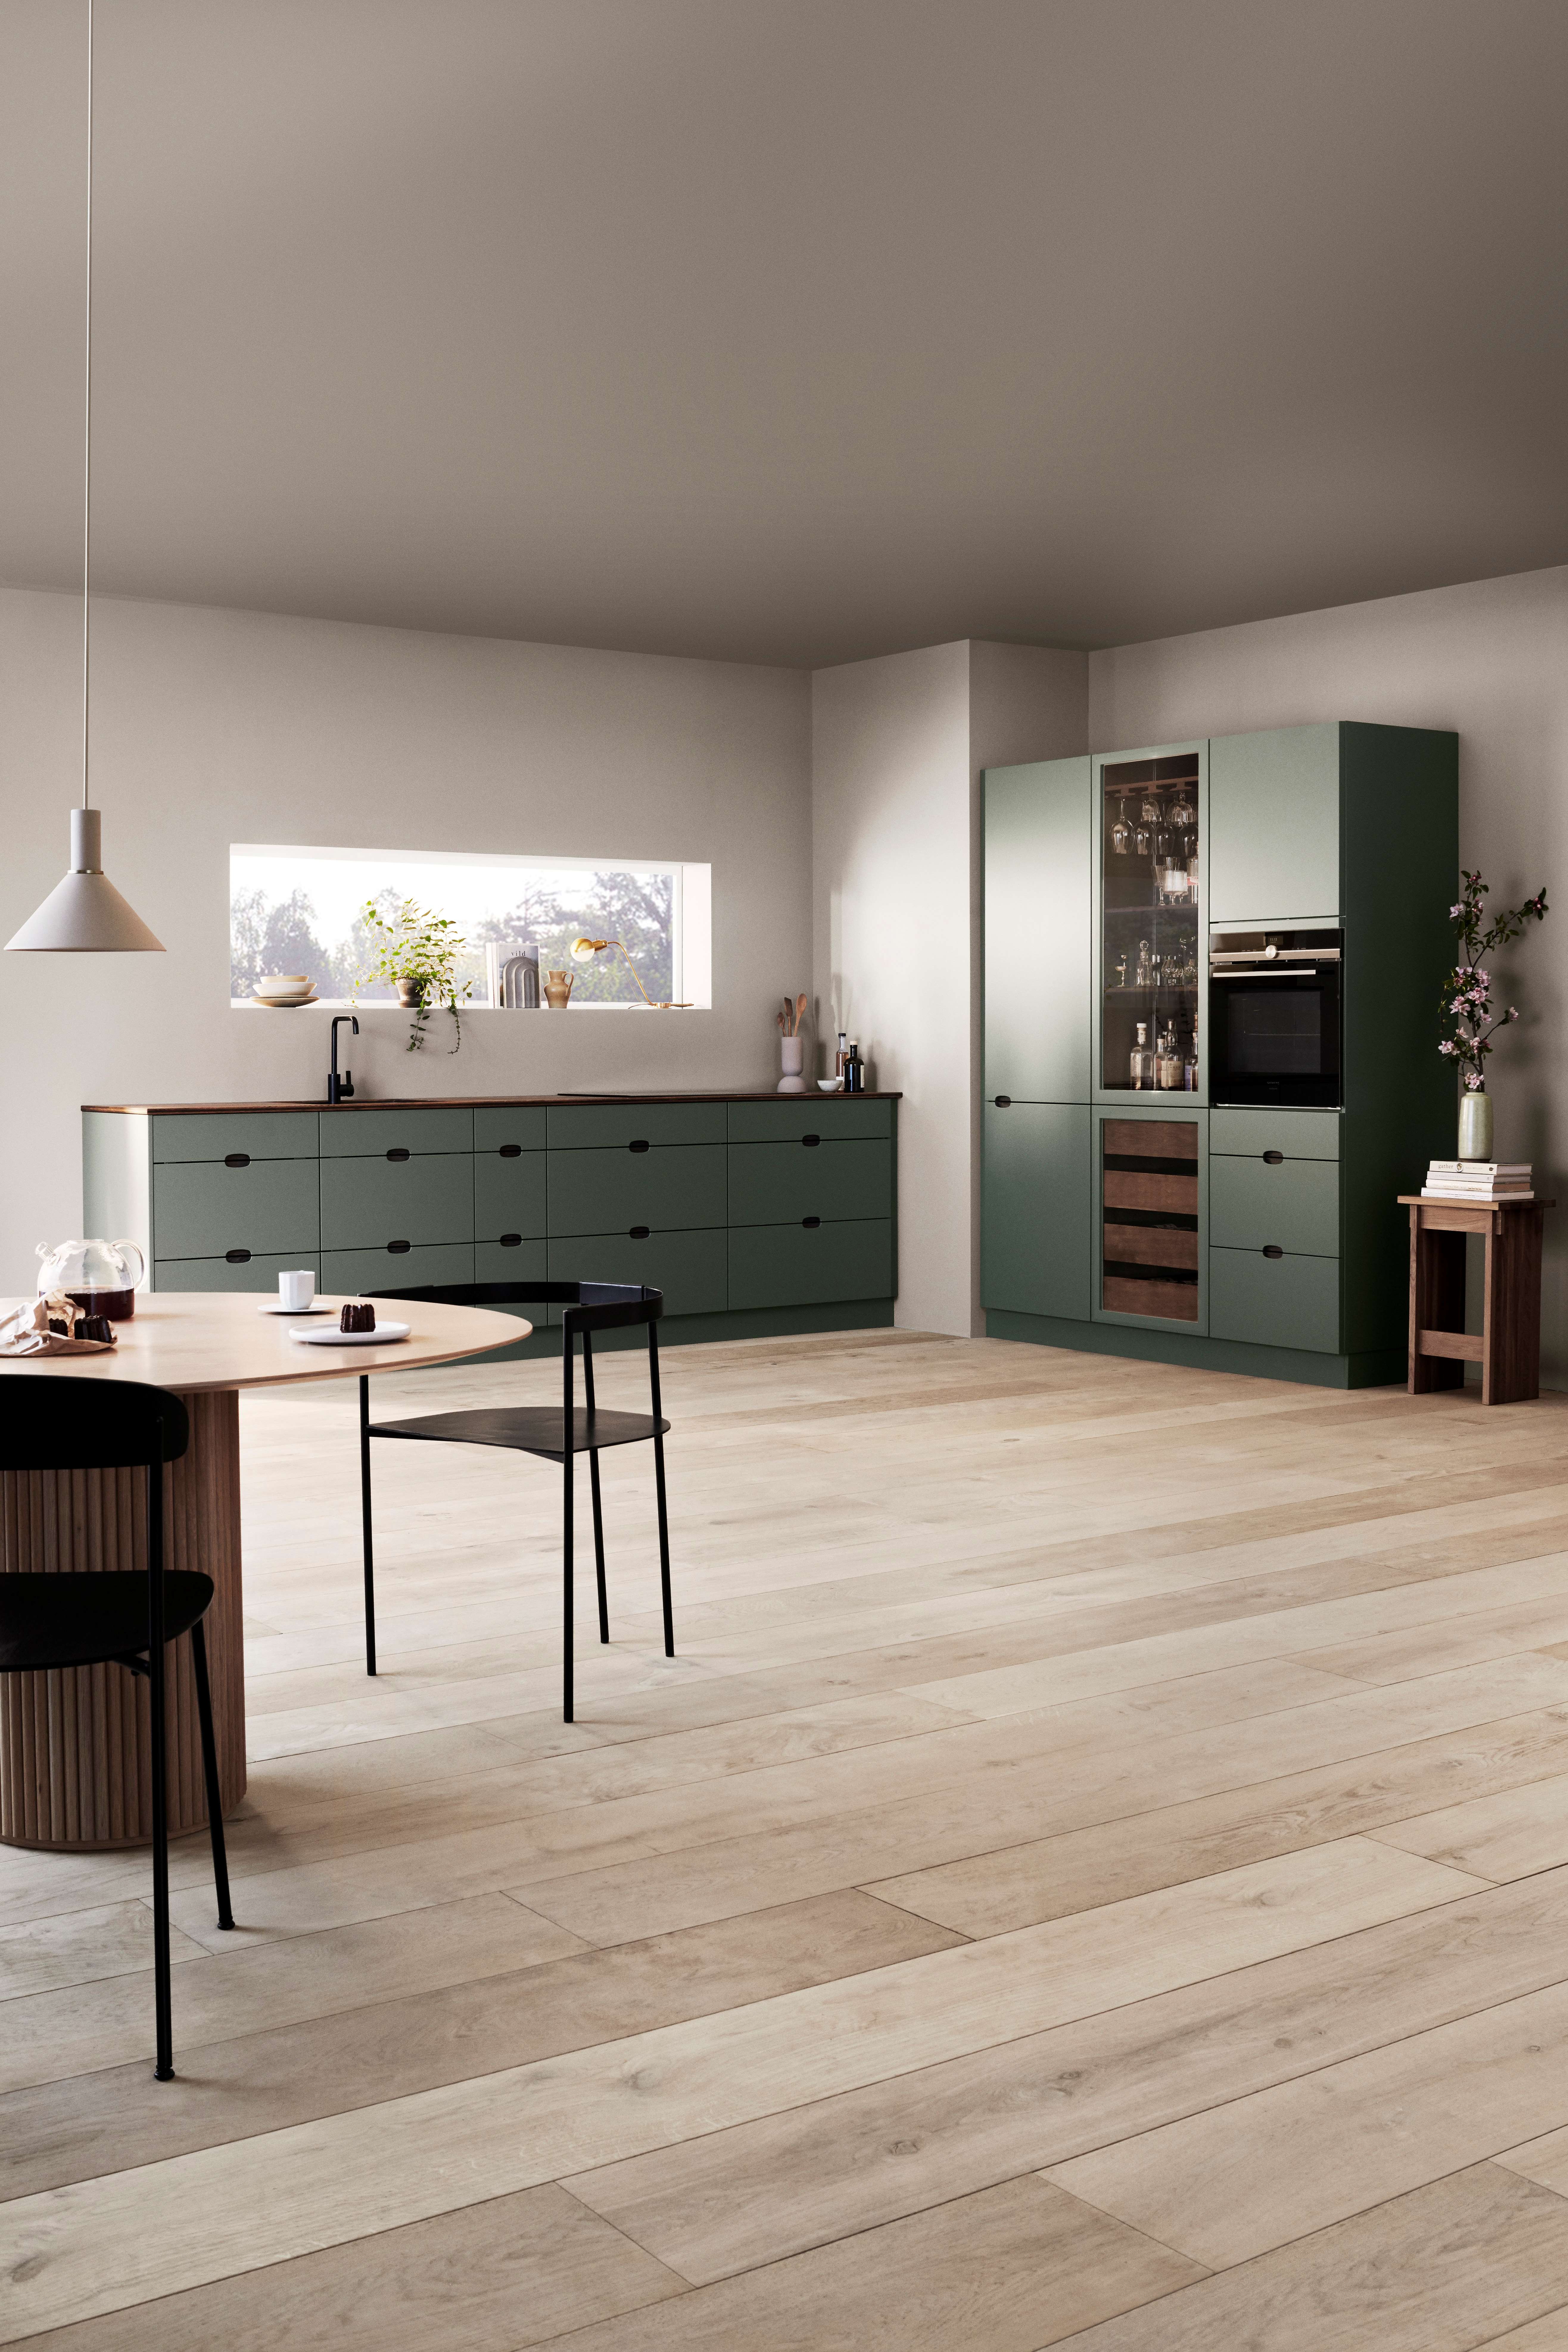 Green kitchen with a wine refrigerator and a wooden worktop